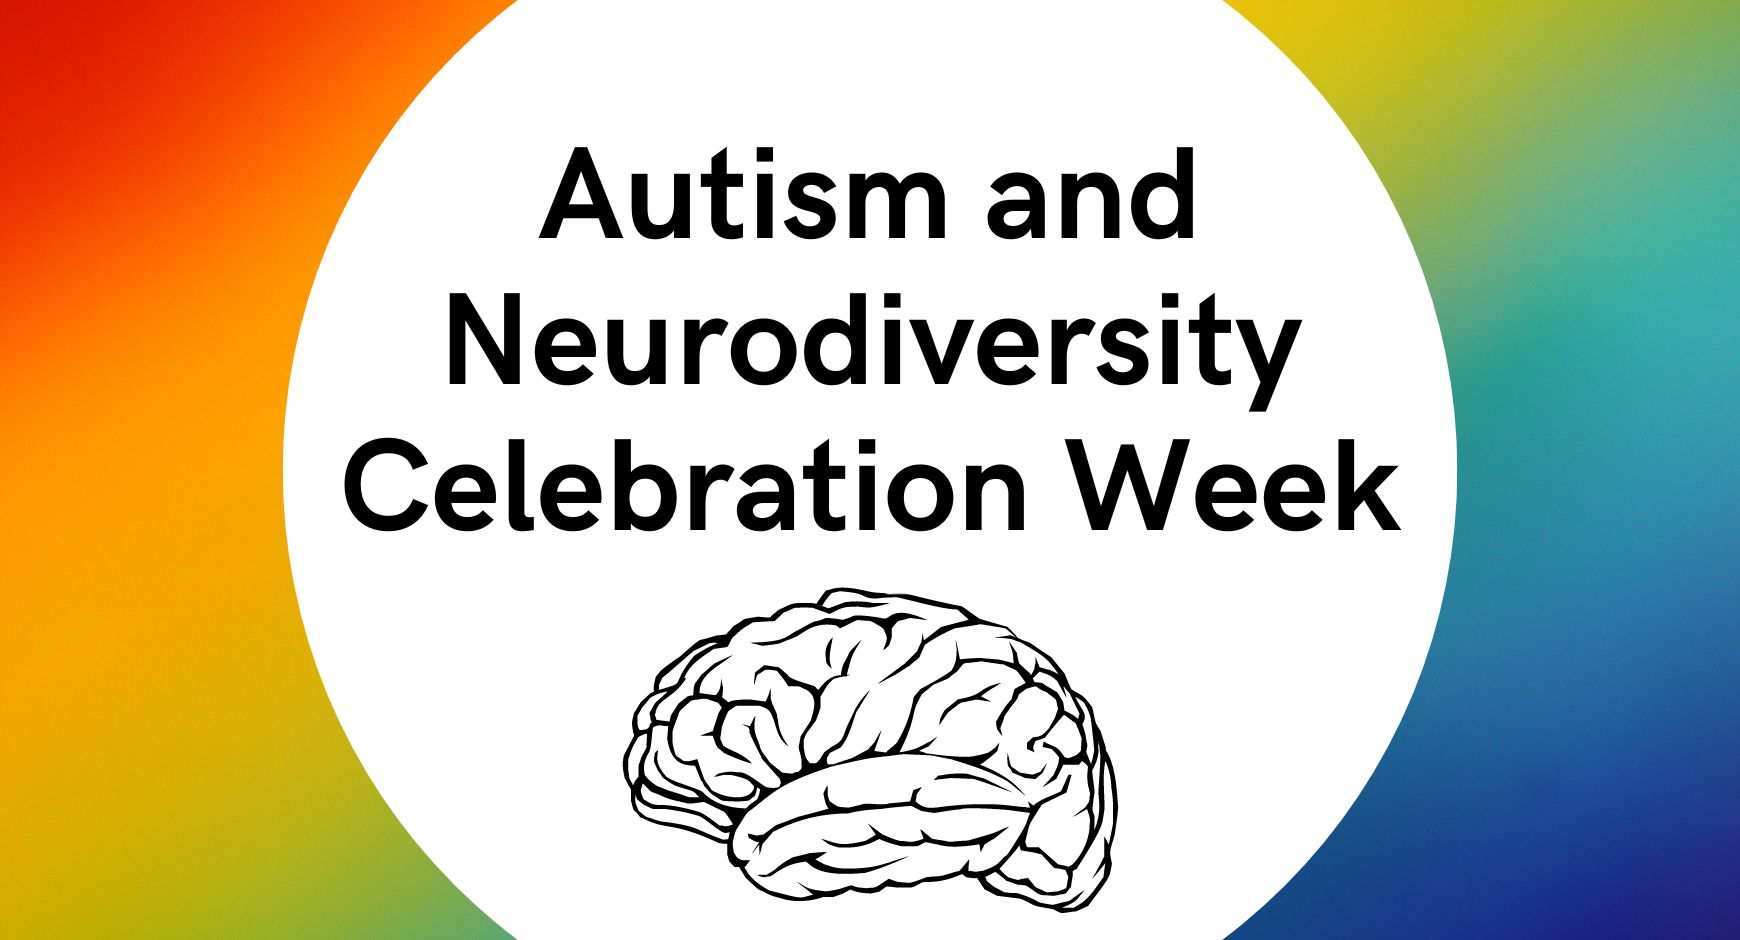 words that read "Autism and Neurodiversity Celebration Week" over a rainbow background and an outline of a brain.